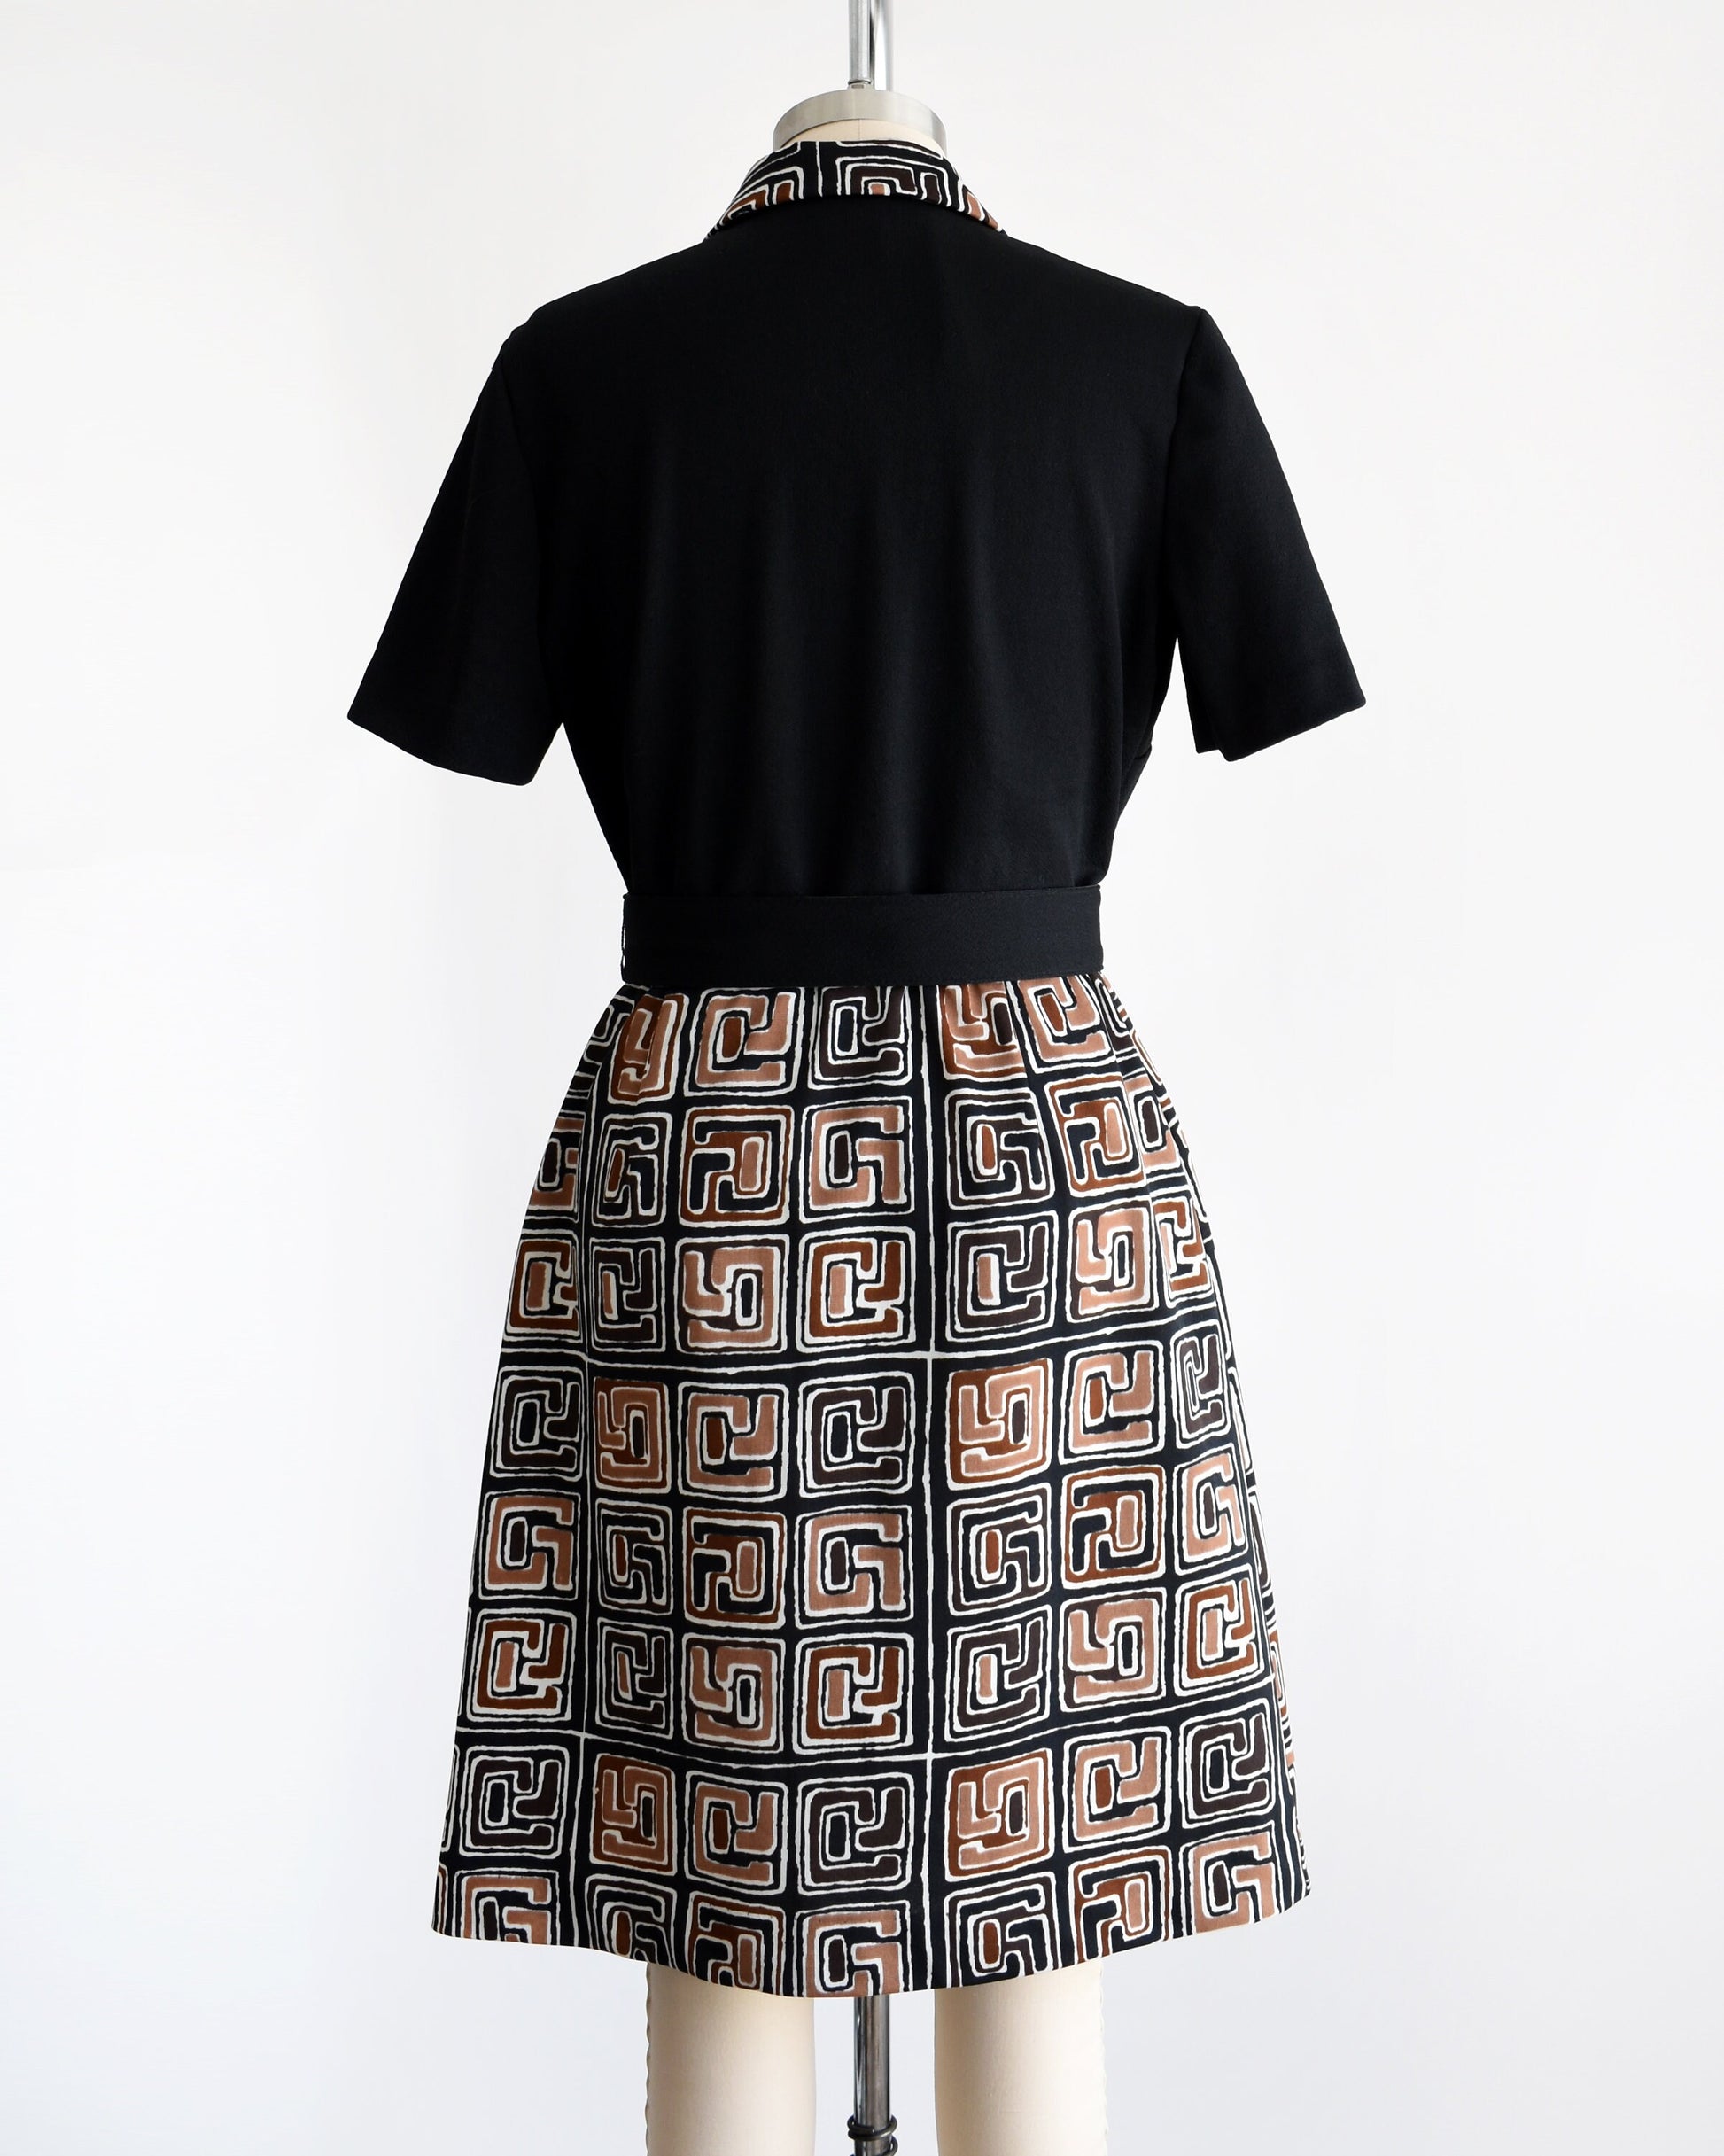 Back view of a vintage 60s dress that has a matching geometric print brown, black and white collar and skirt. Matching black belt. Short sleeves. The dress is on a dress form.